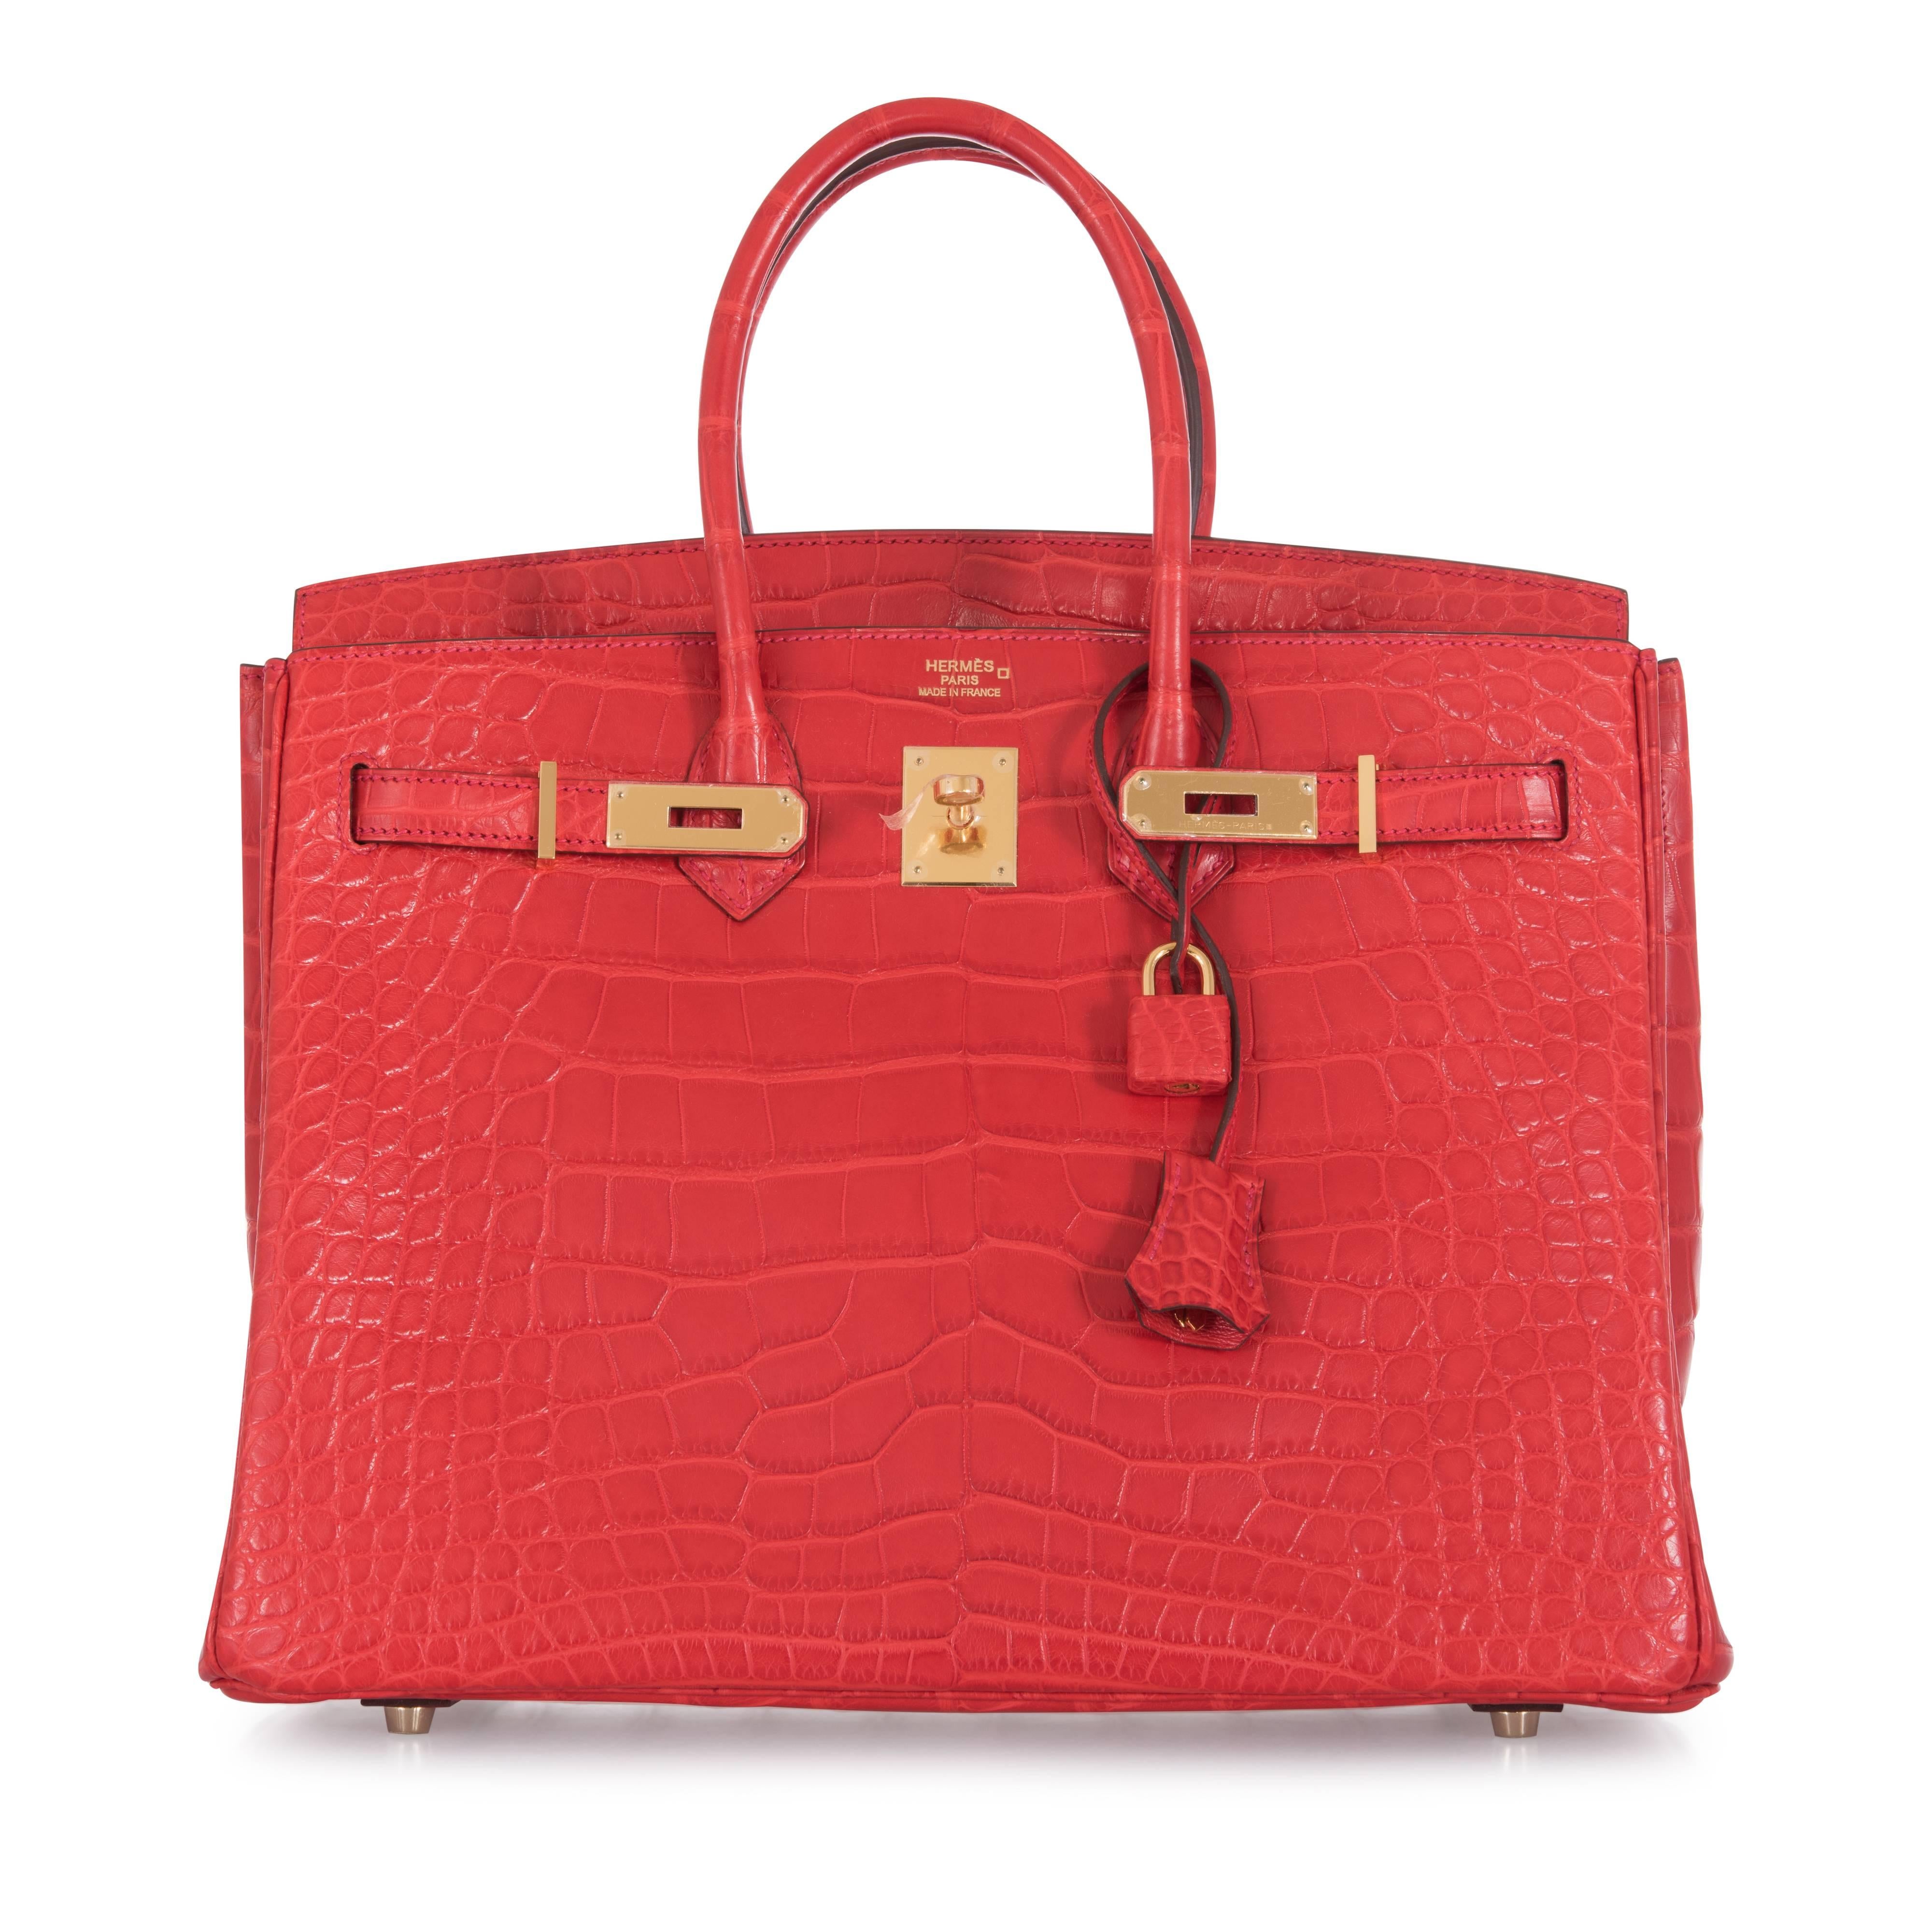 Hermes 35cm Birkin bag Geranium alligator crocodile with incredible gold hardware ! 

New Condition

Hardware: gold
Country of Origin: France
Color: Geranium 
Accompanied by: Care Booklet; Dust Bag; clochette lock and key  Plastic Raincoat